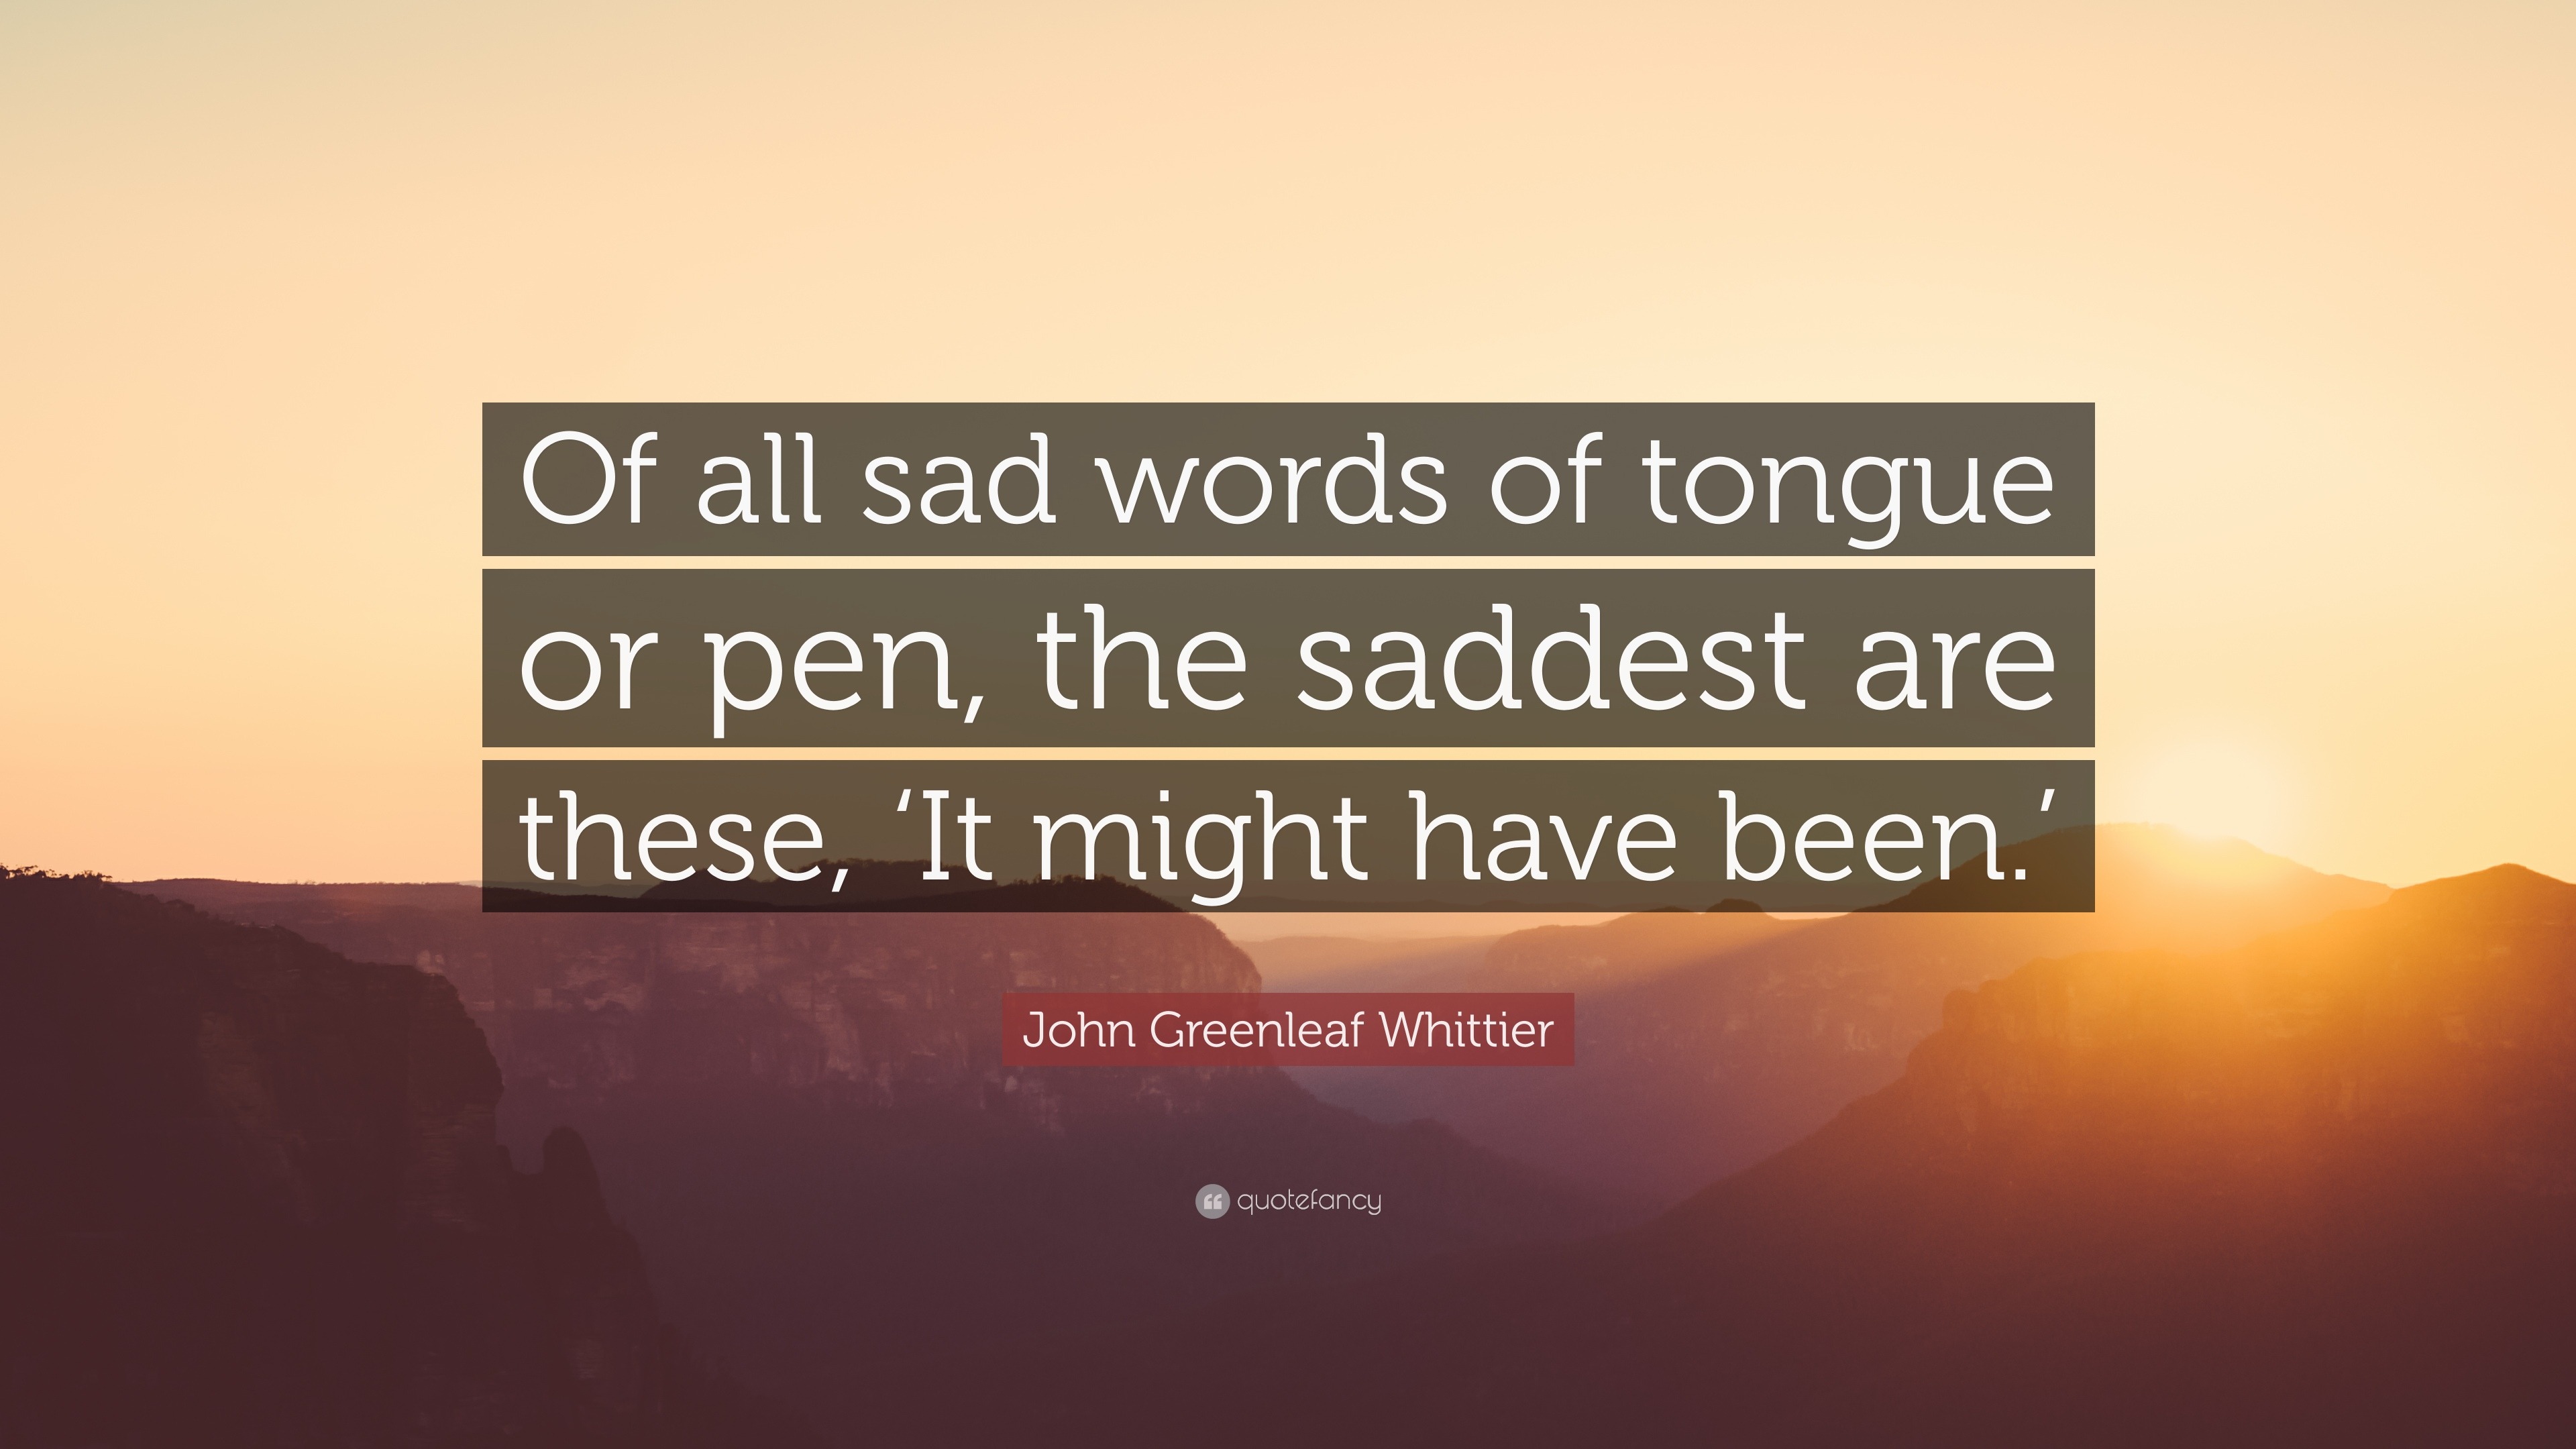 John Greenleaf Whittier Quote Of All Sad Words Of Tongue Or Pen The Saddest Are These